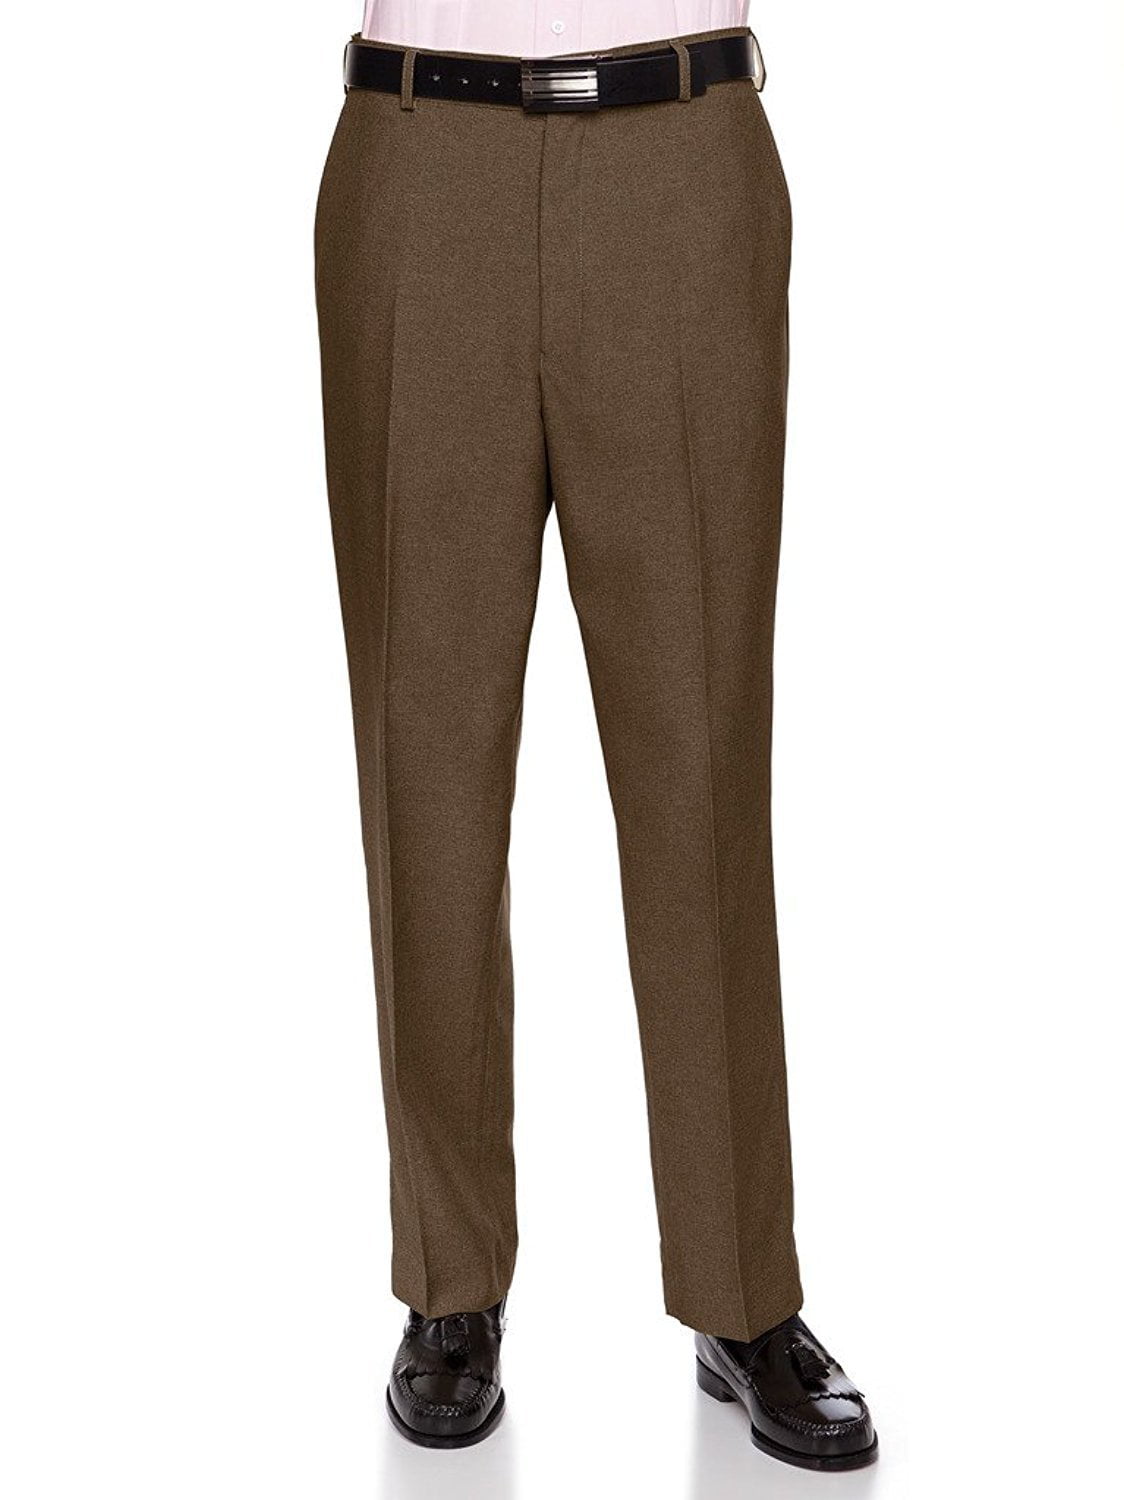 RGM Men's Flat Front Dress Pant Modern Fit Perfect for Every Day!